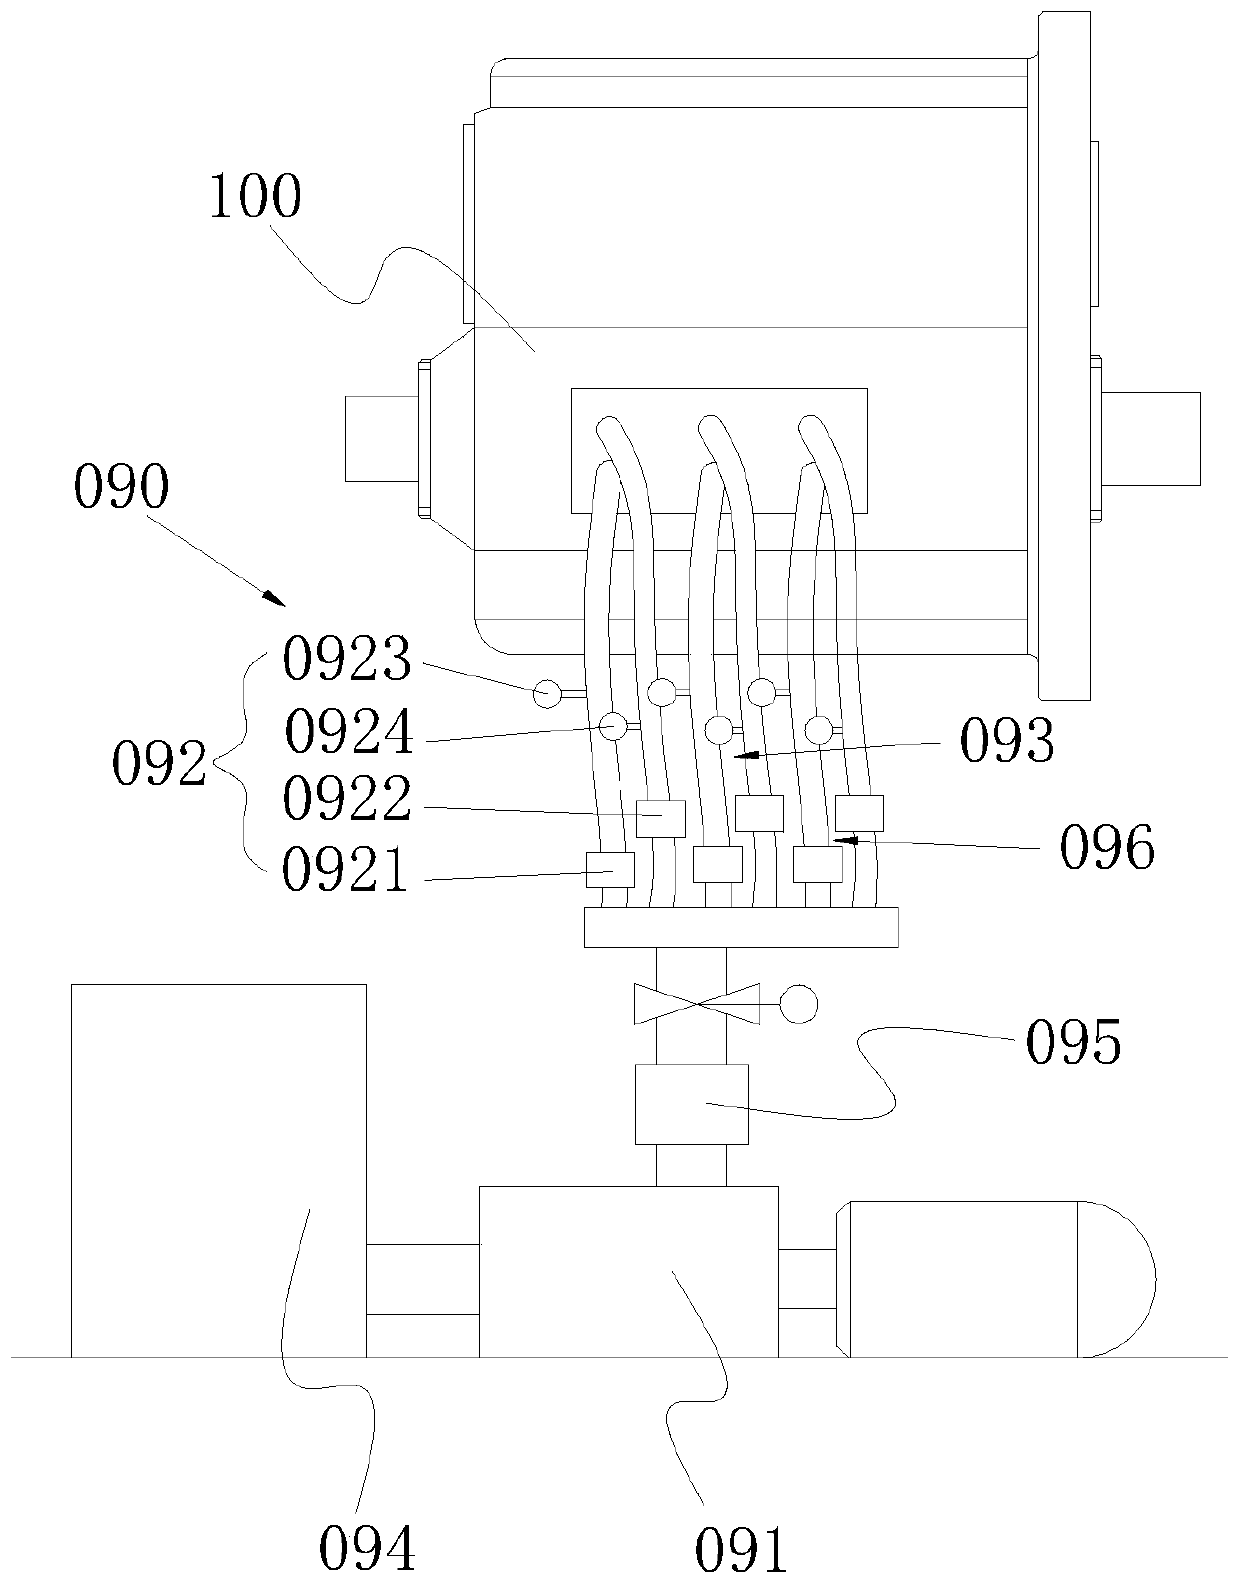 Variable speed control system for eight-gear transmission